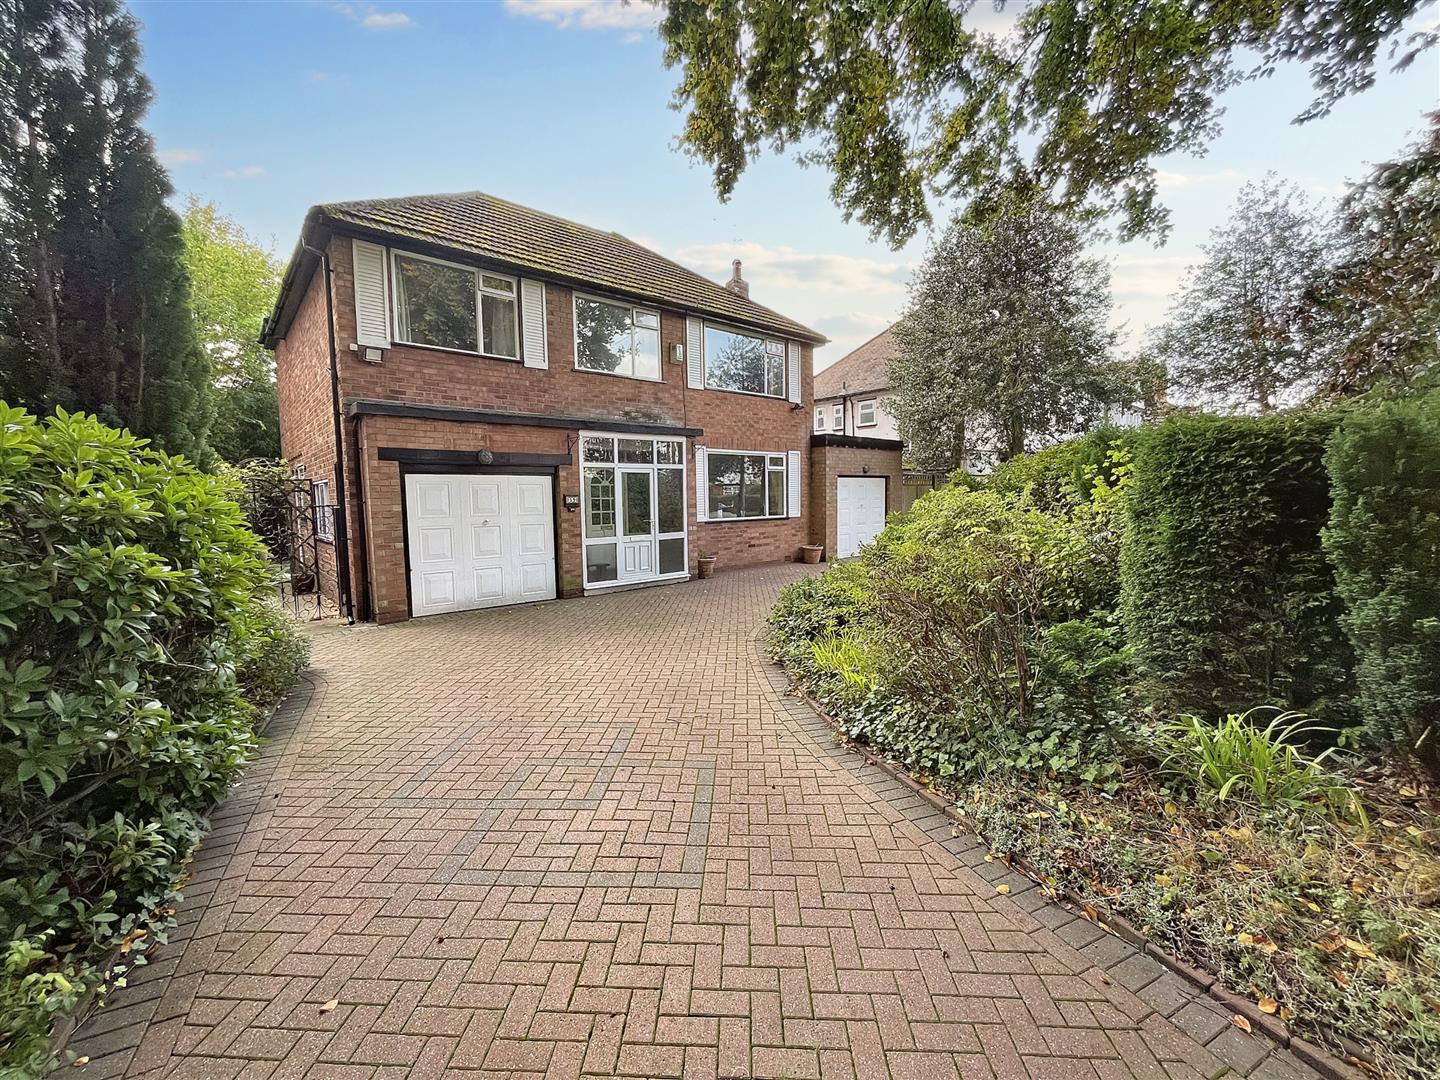 4 bed detached house for sale in Harboro Road, Sale - Property Image 1